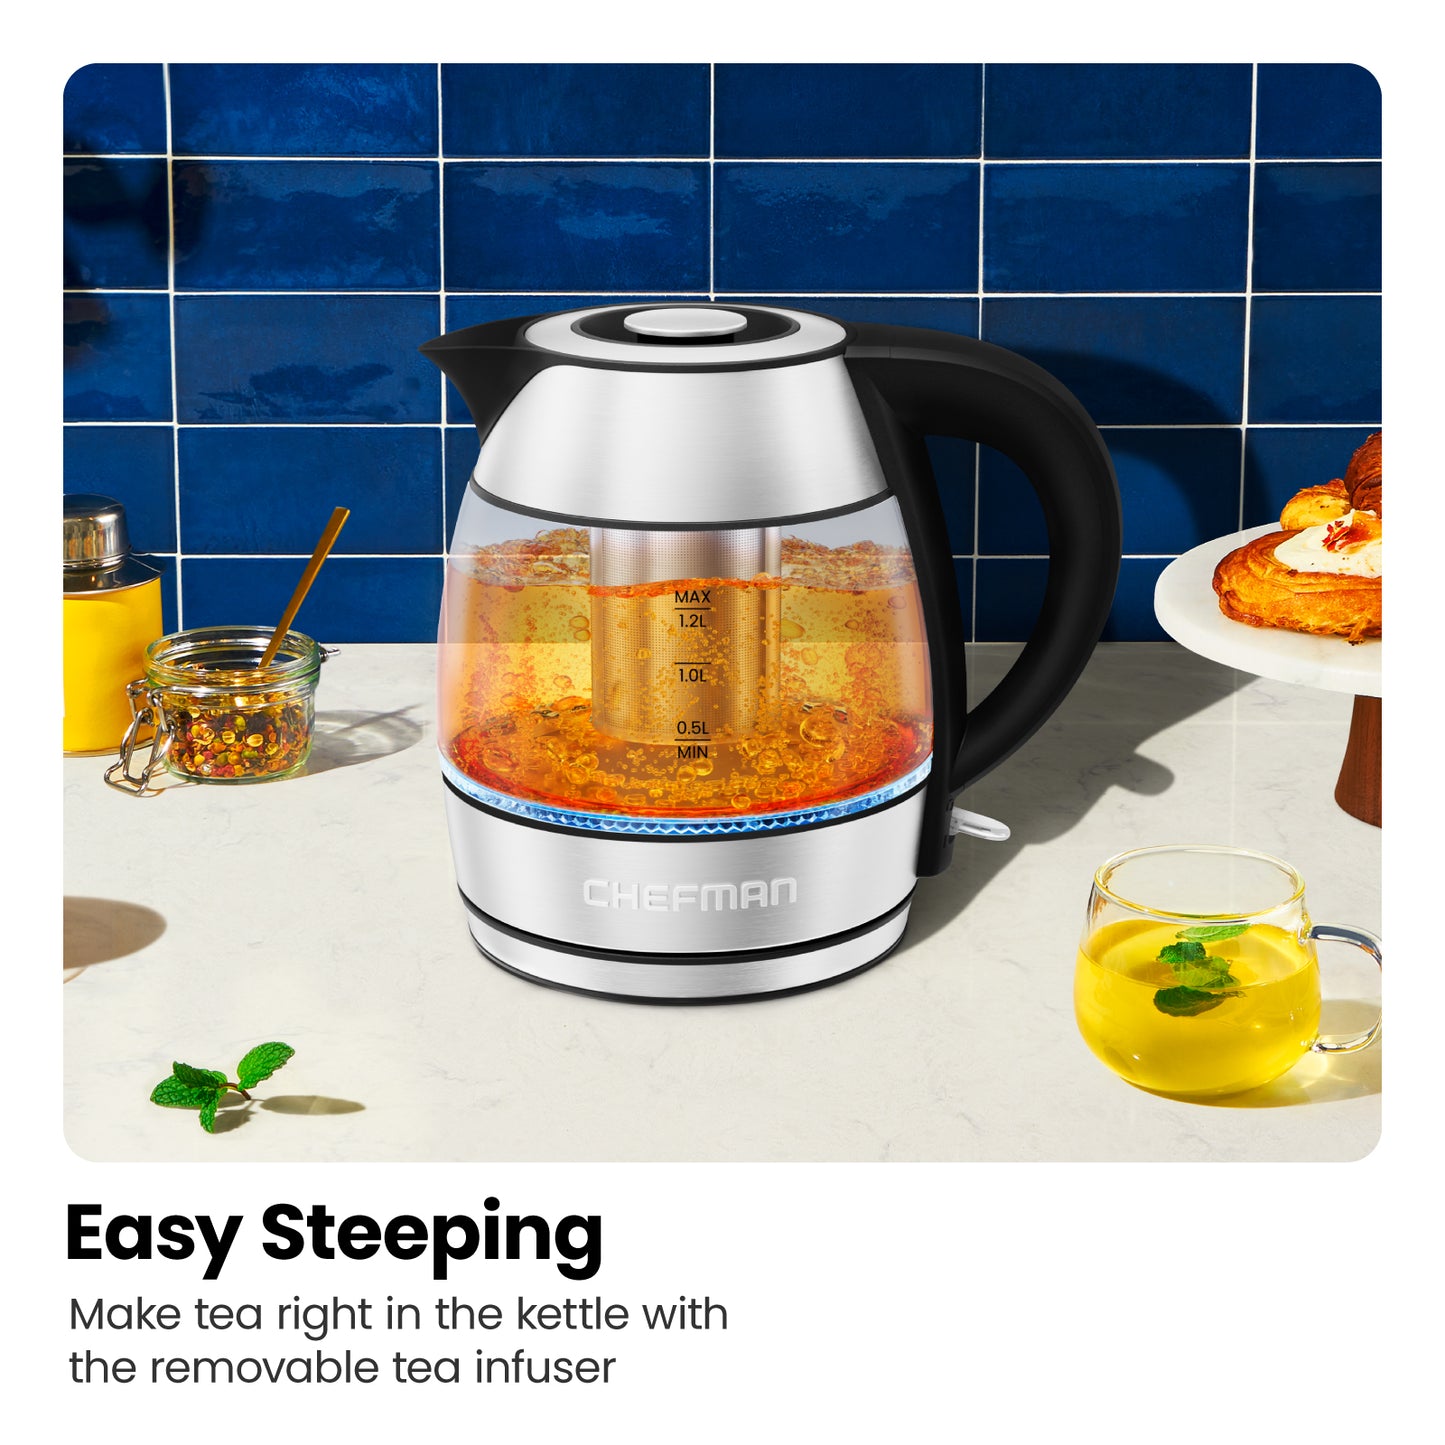 $6 Discount on Chefman Electric Kettle. Currently priced at $23.99. Love  this Kettle. : r/Costco